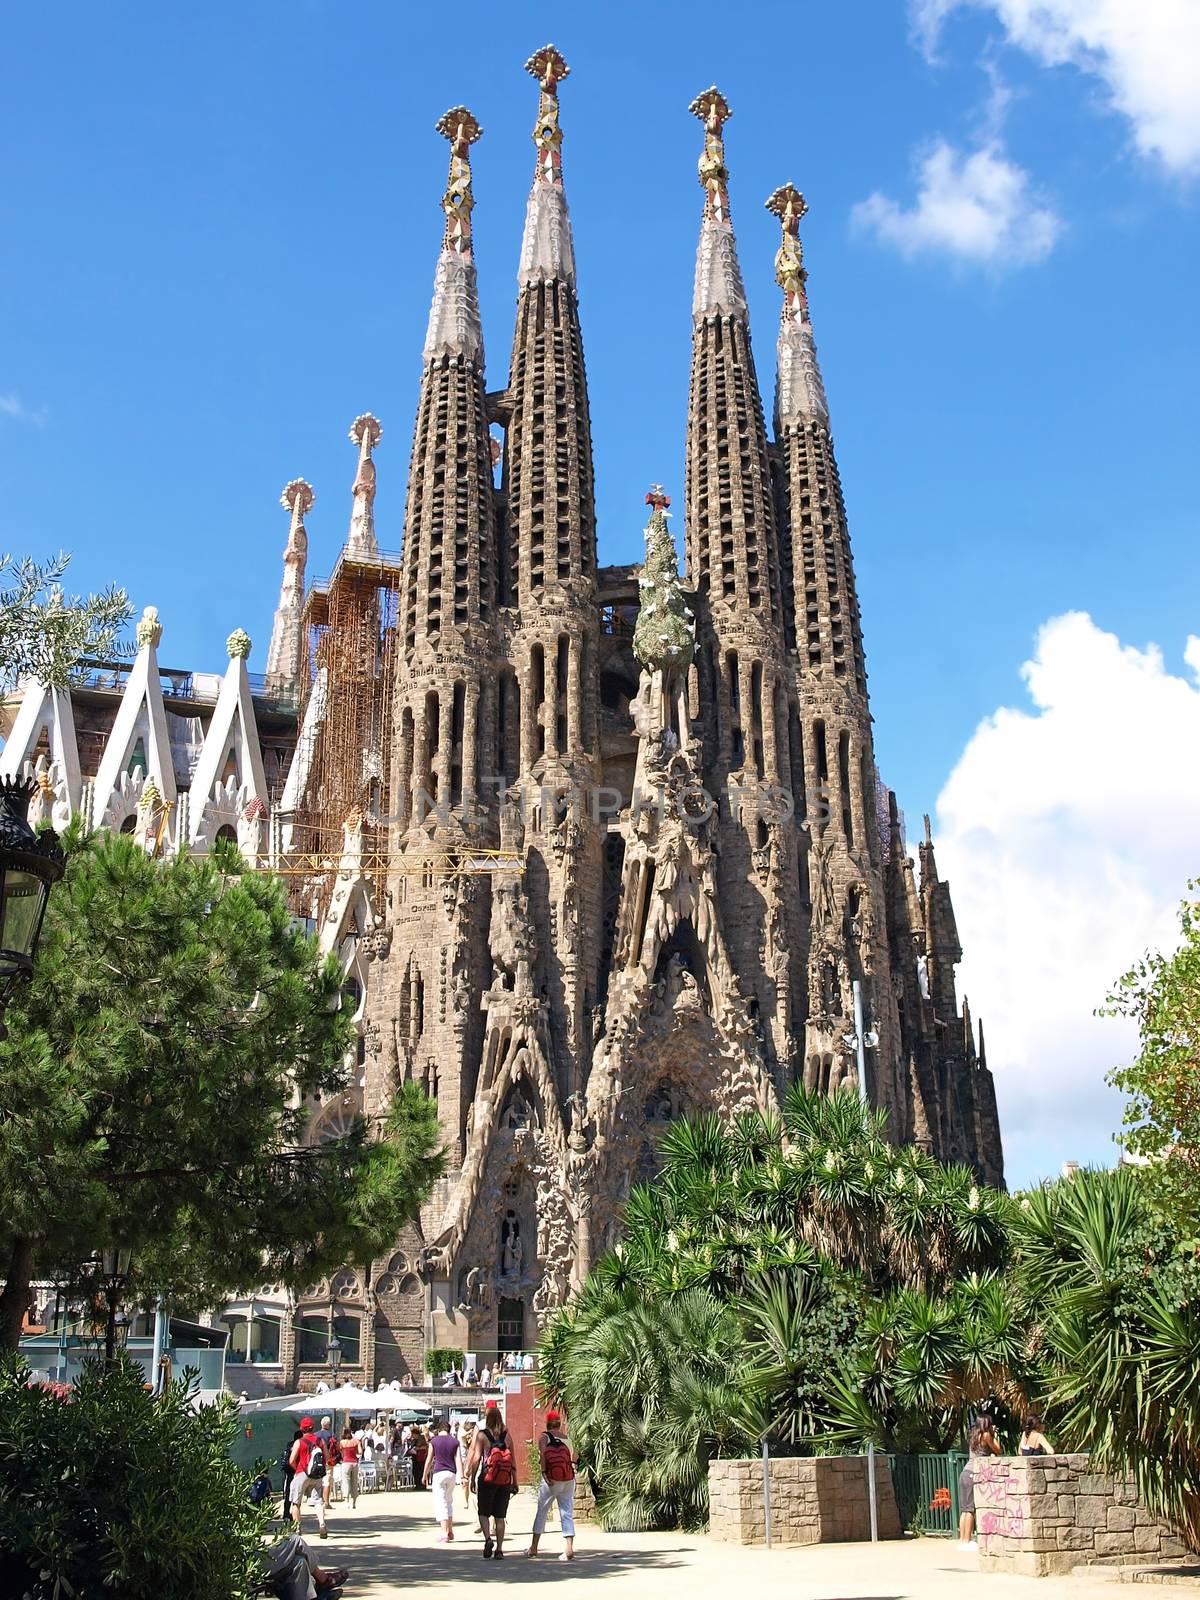 BARCELONA, SPAIN - JULY 19: La Sagrada Familia - the impressive cathedral designed by Gaudi, which is being build since 19 March 1882 and is not finished yet July 19, 2009 in Barcelona, Spain.
Sagrada Familia, Gaudi's most famous and uncompleted cathedral in Barcelona, Spain.